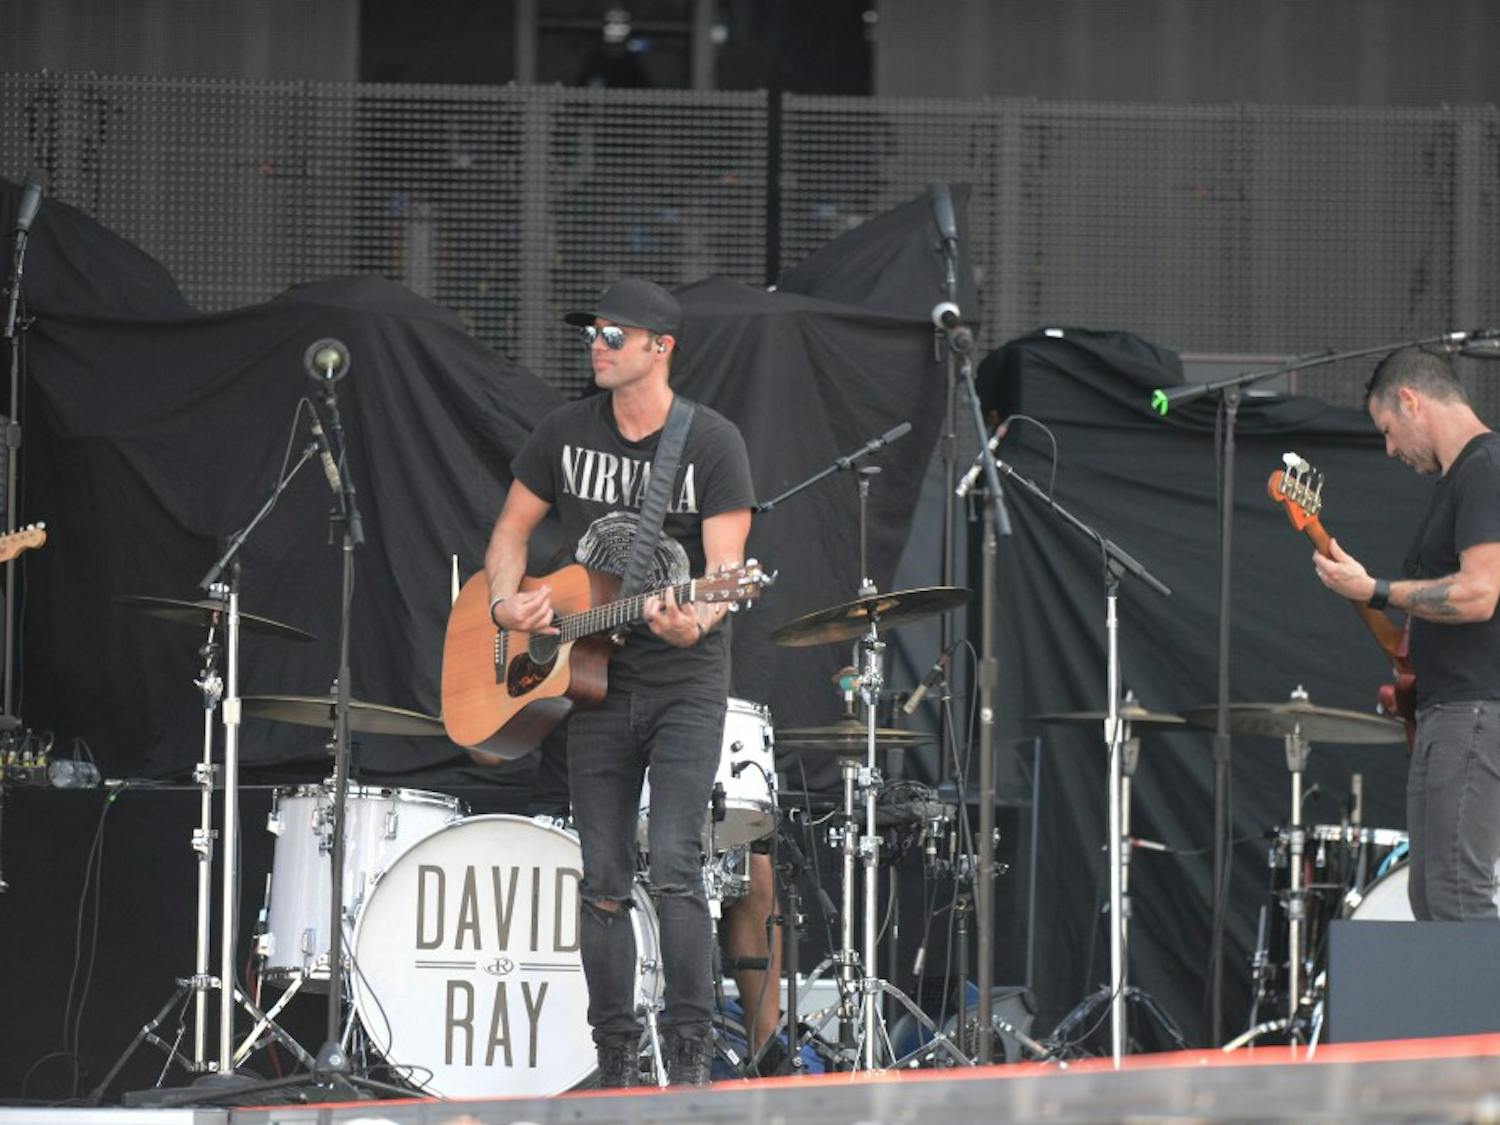 David Ray&nbsp;performs at Music and Miracles Superfest on Saturday, April 22, 2017 at Jordan-Hare Stadium in Auburn, Ala.